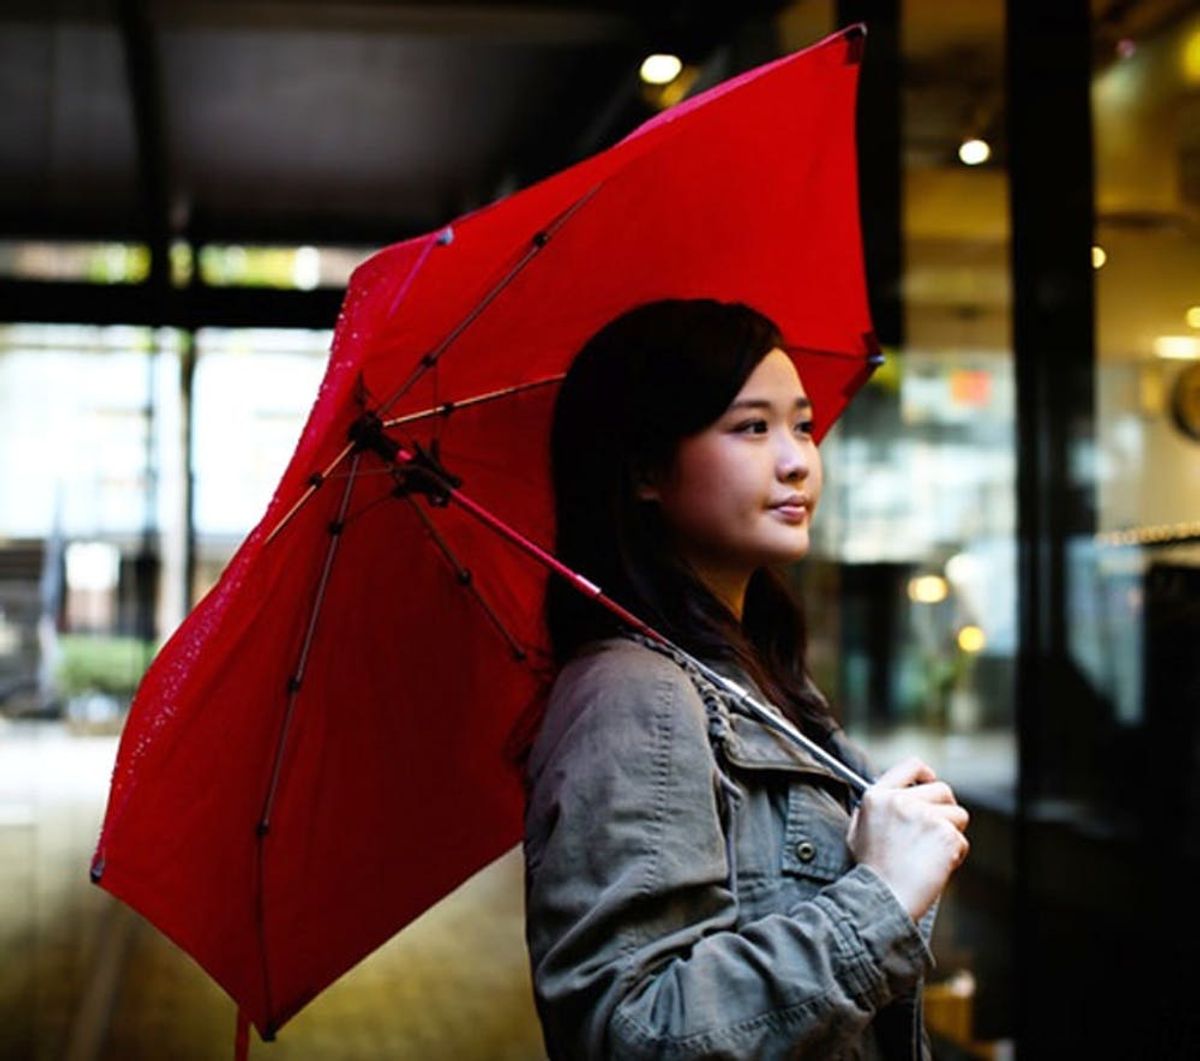 This Might Be the Last Umbrella You Will Ever Buy